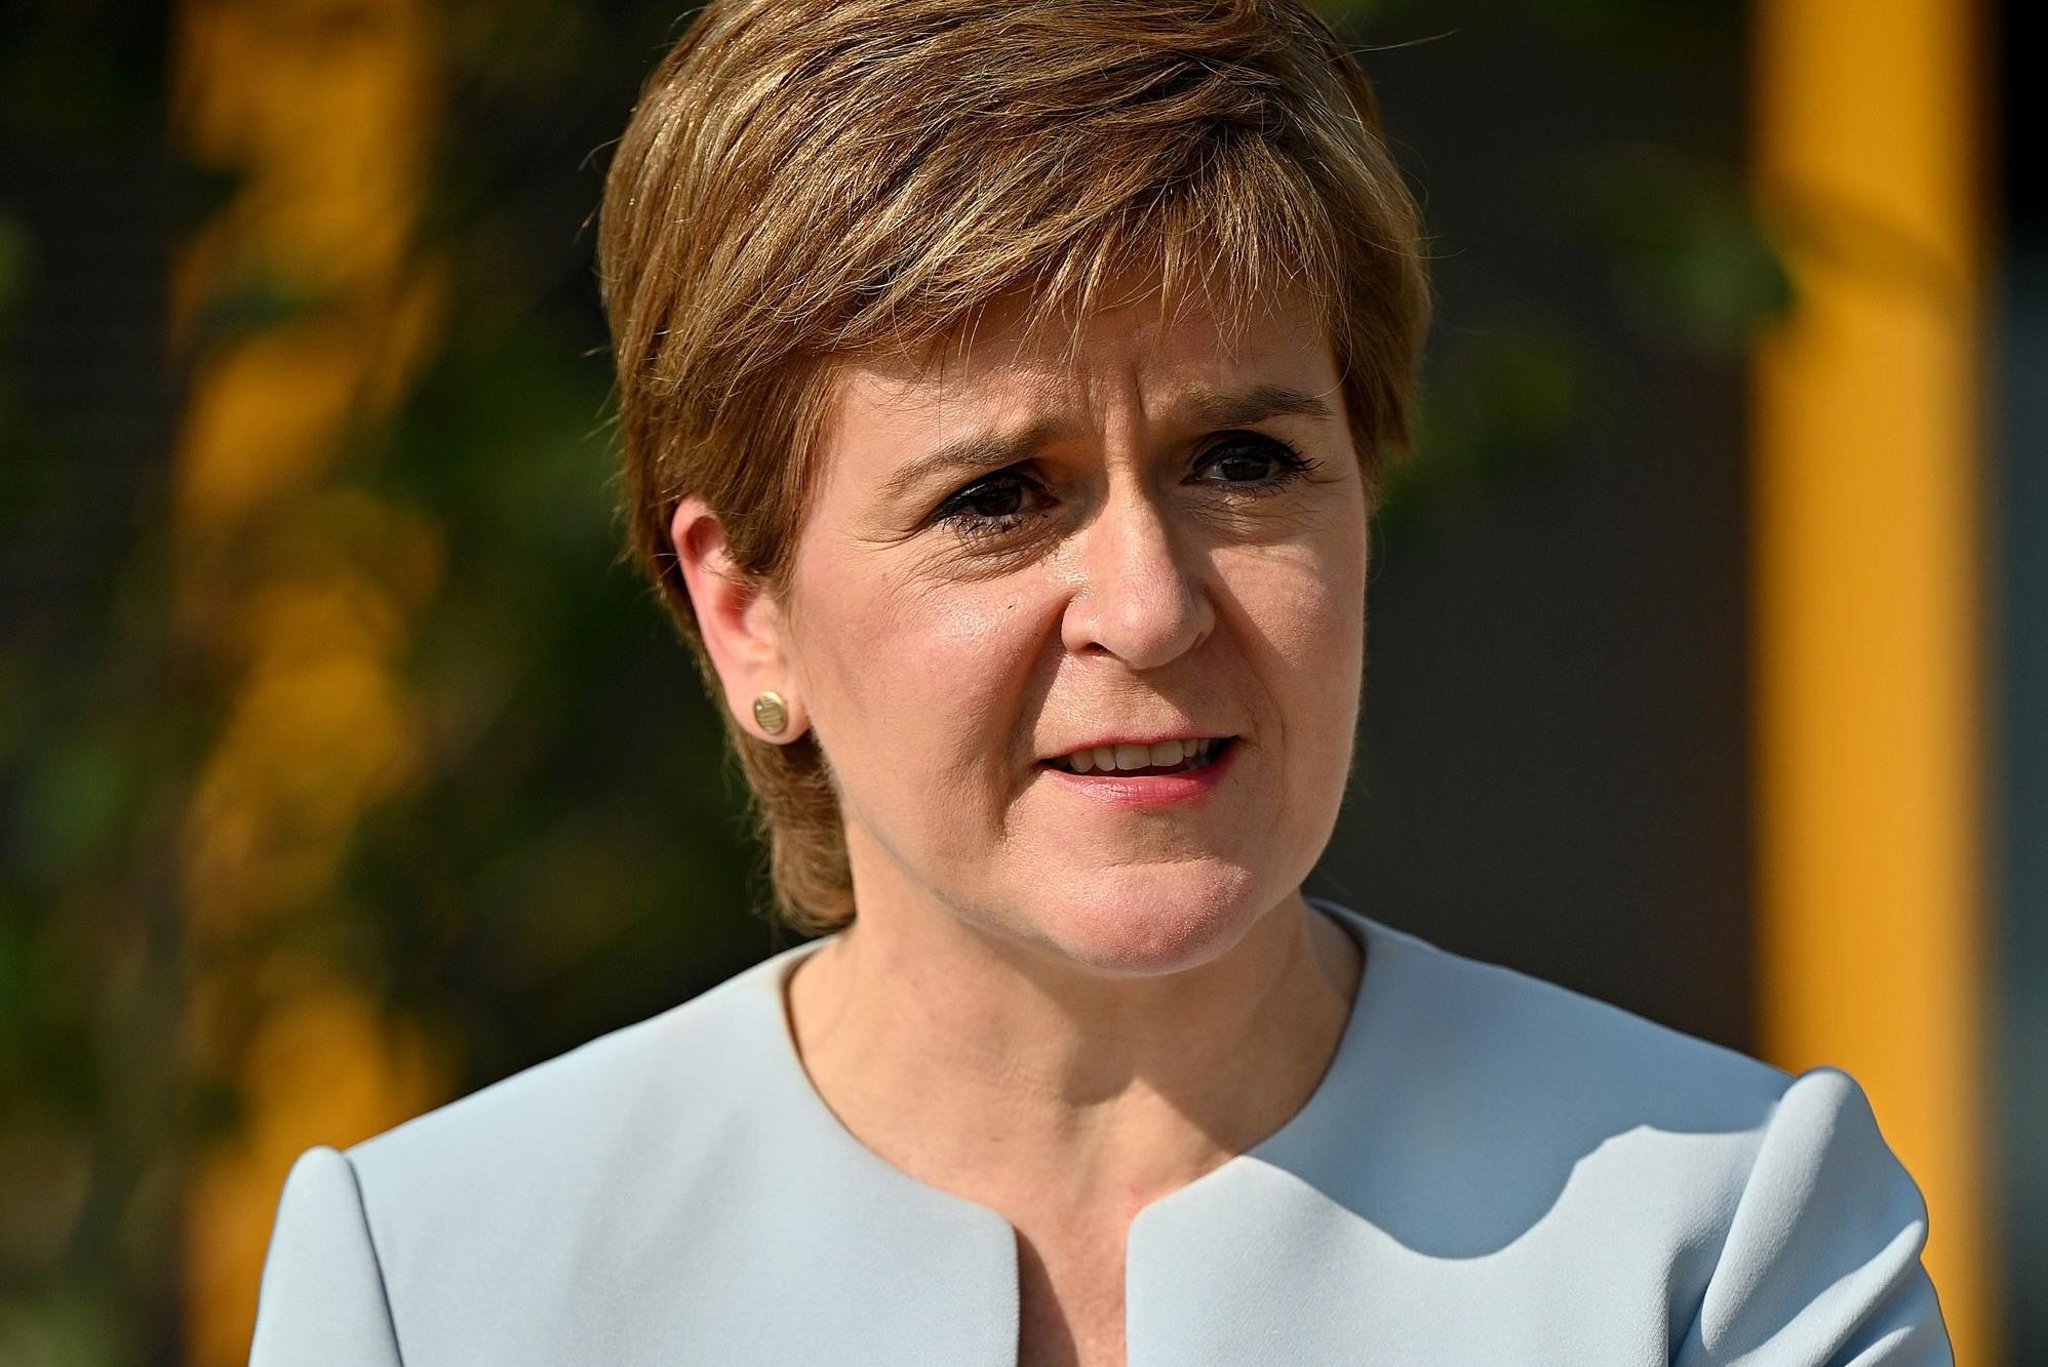 Nicola Sturgeon to urge 'credible action' on climate change from world leaders in a speech on Monday - The Scotsman